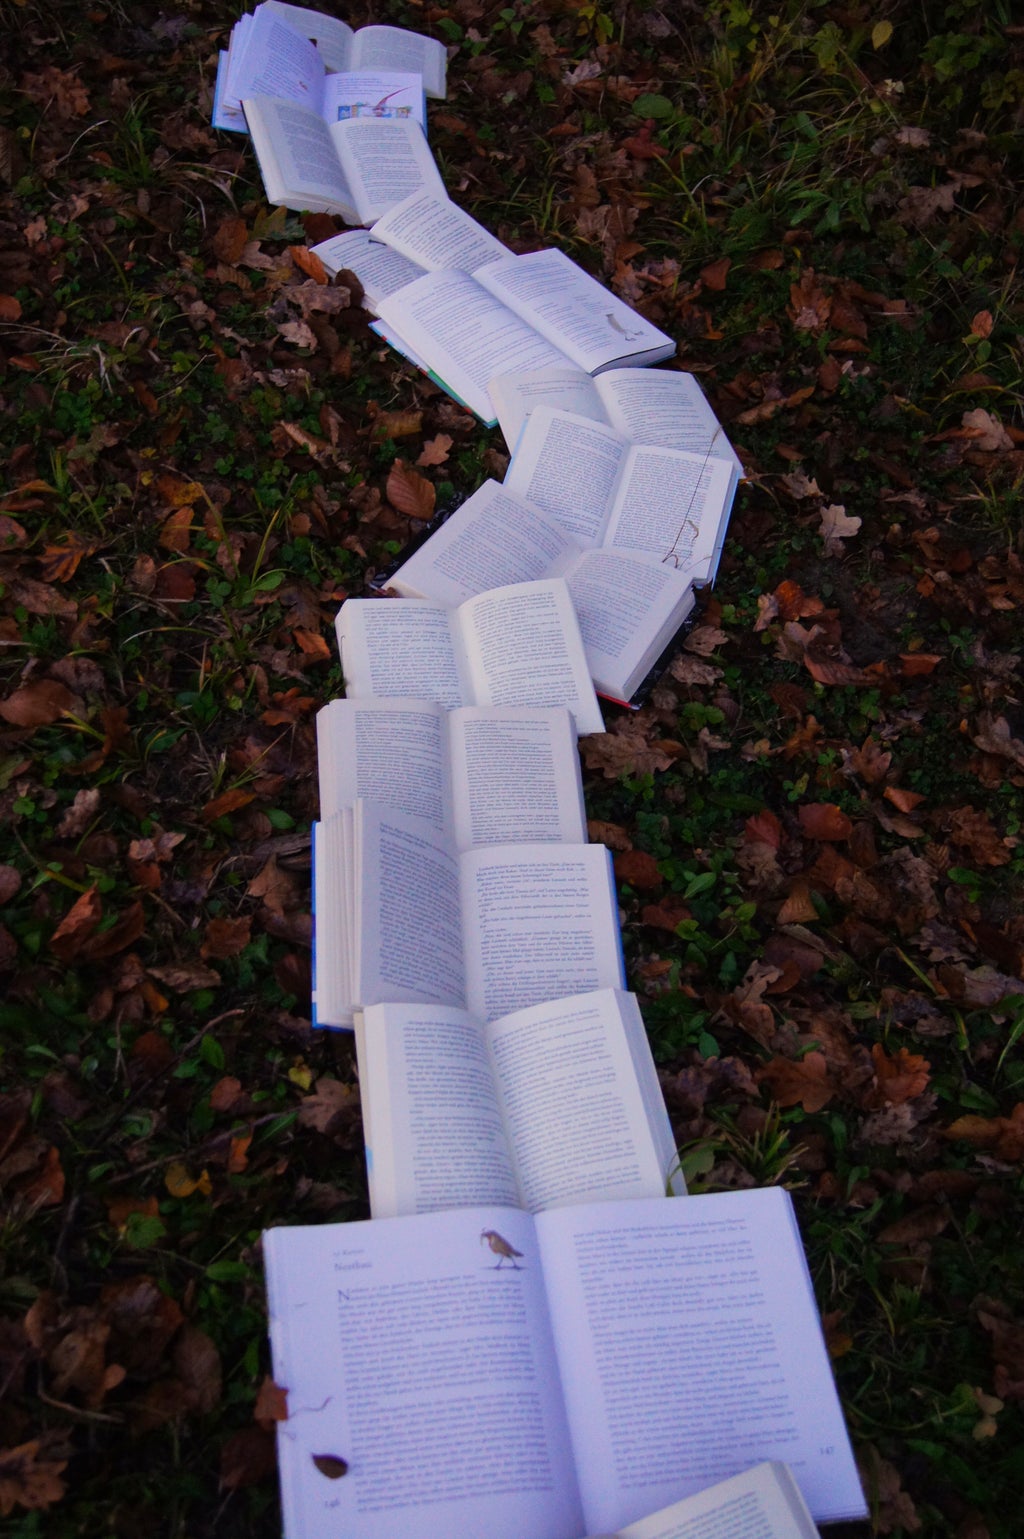 Open books on grass littered with fall leaves